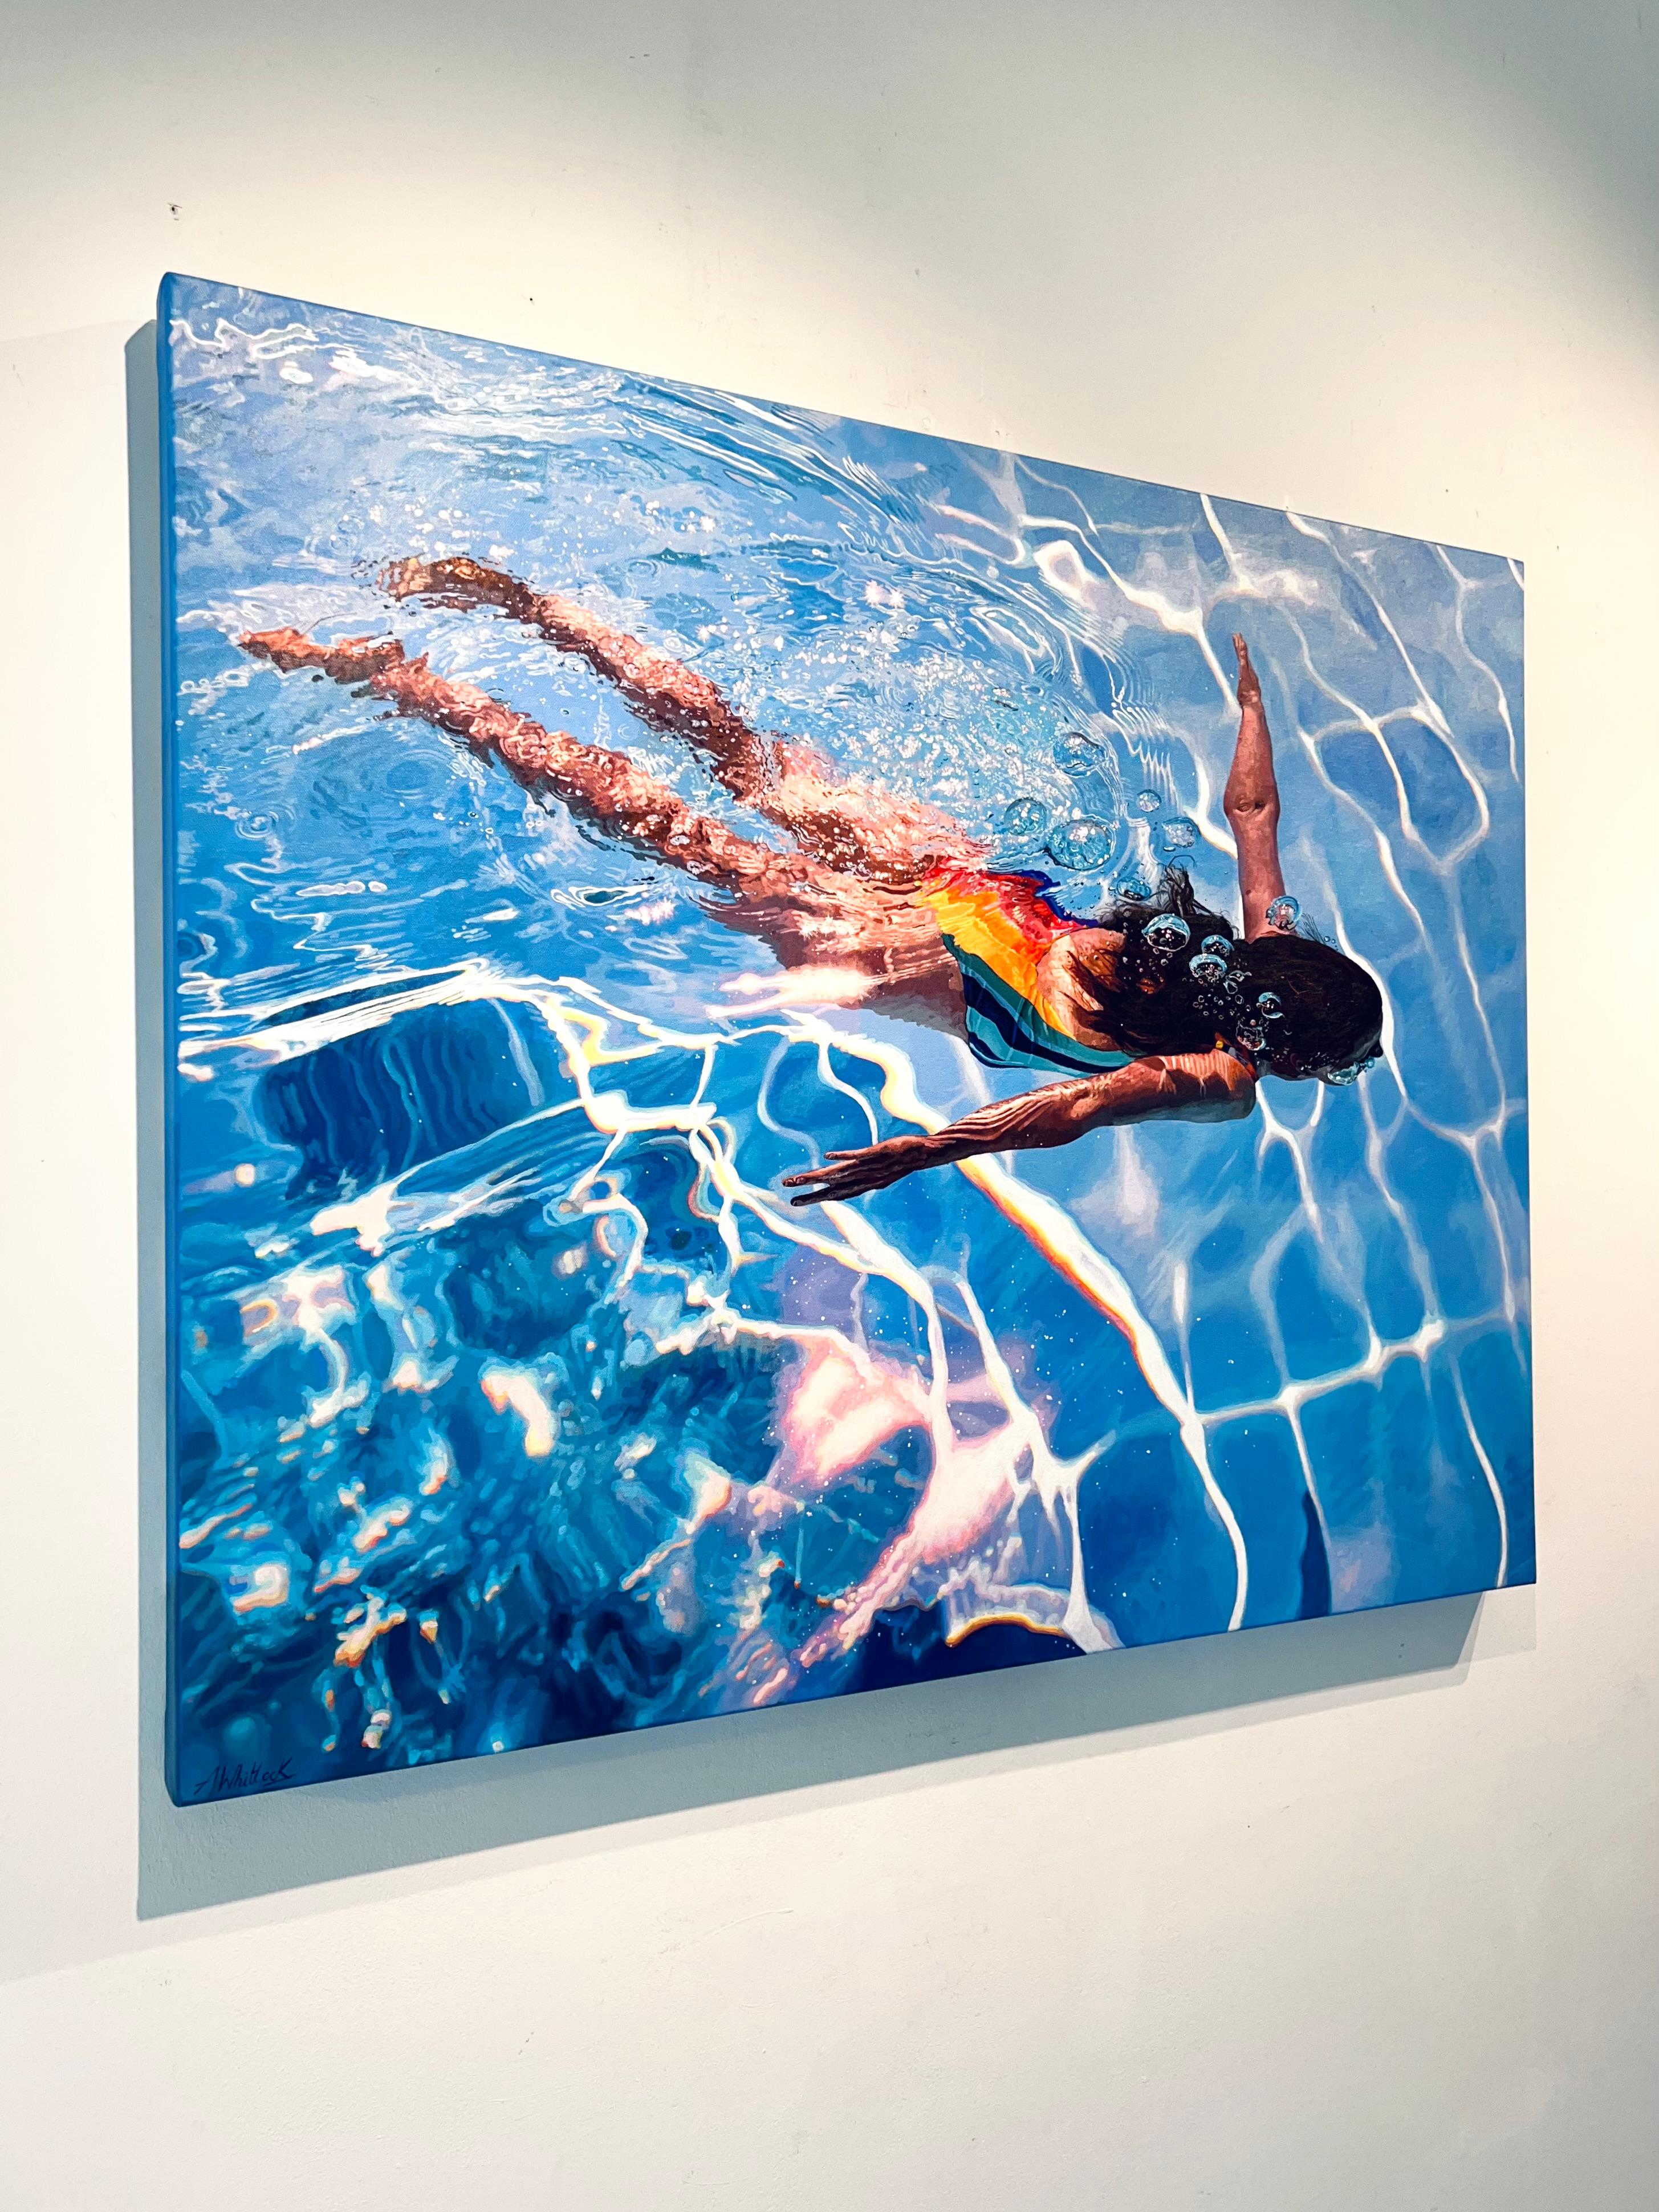 Unbound-original hyperrealistic figurative waterscape painting-contemporary art  - Impressionist Painting by Abi Whitlock